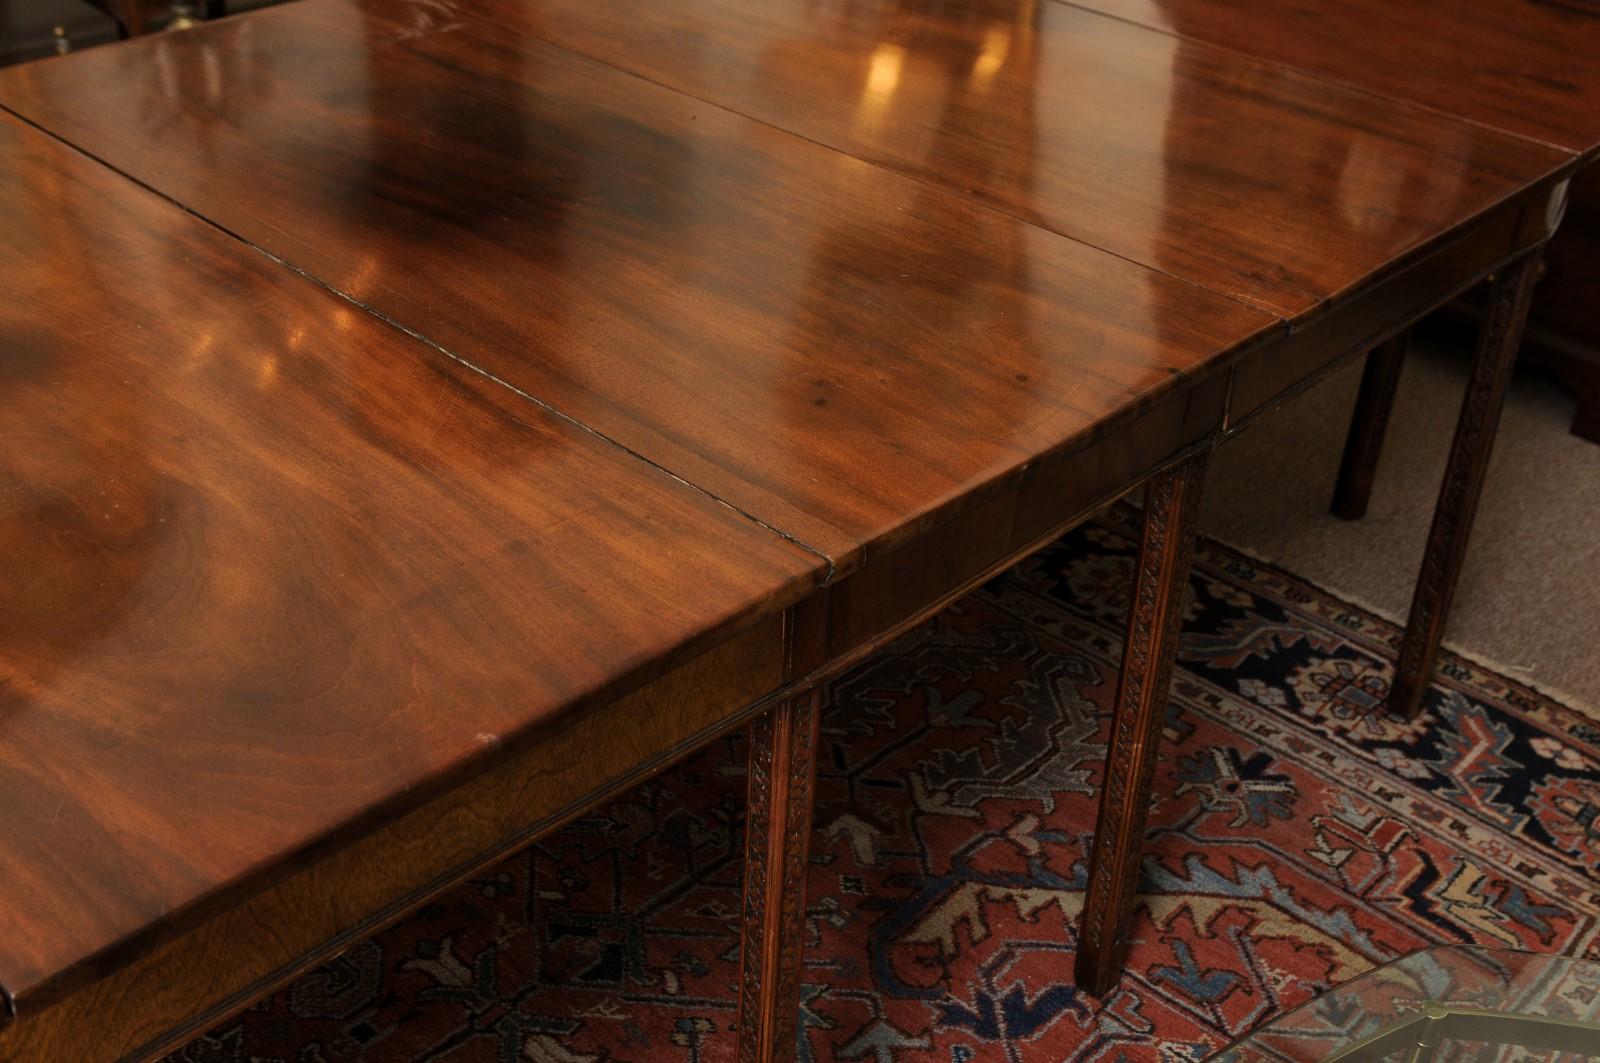 19th Century English Mahogany Dining Table with Carved Legs & 2 Leaves For Sale 3